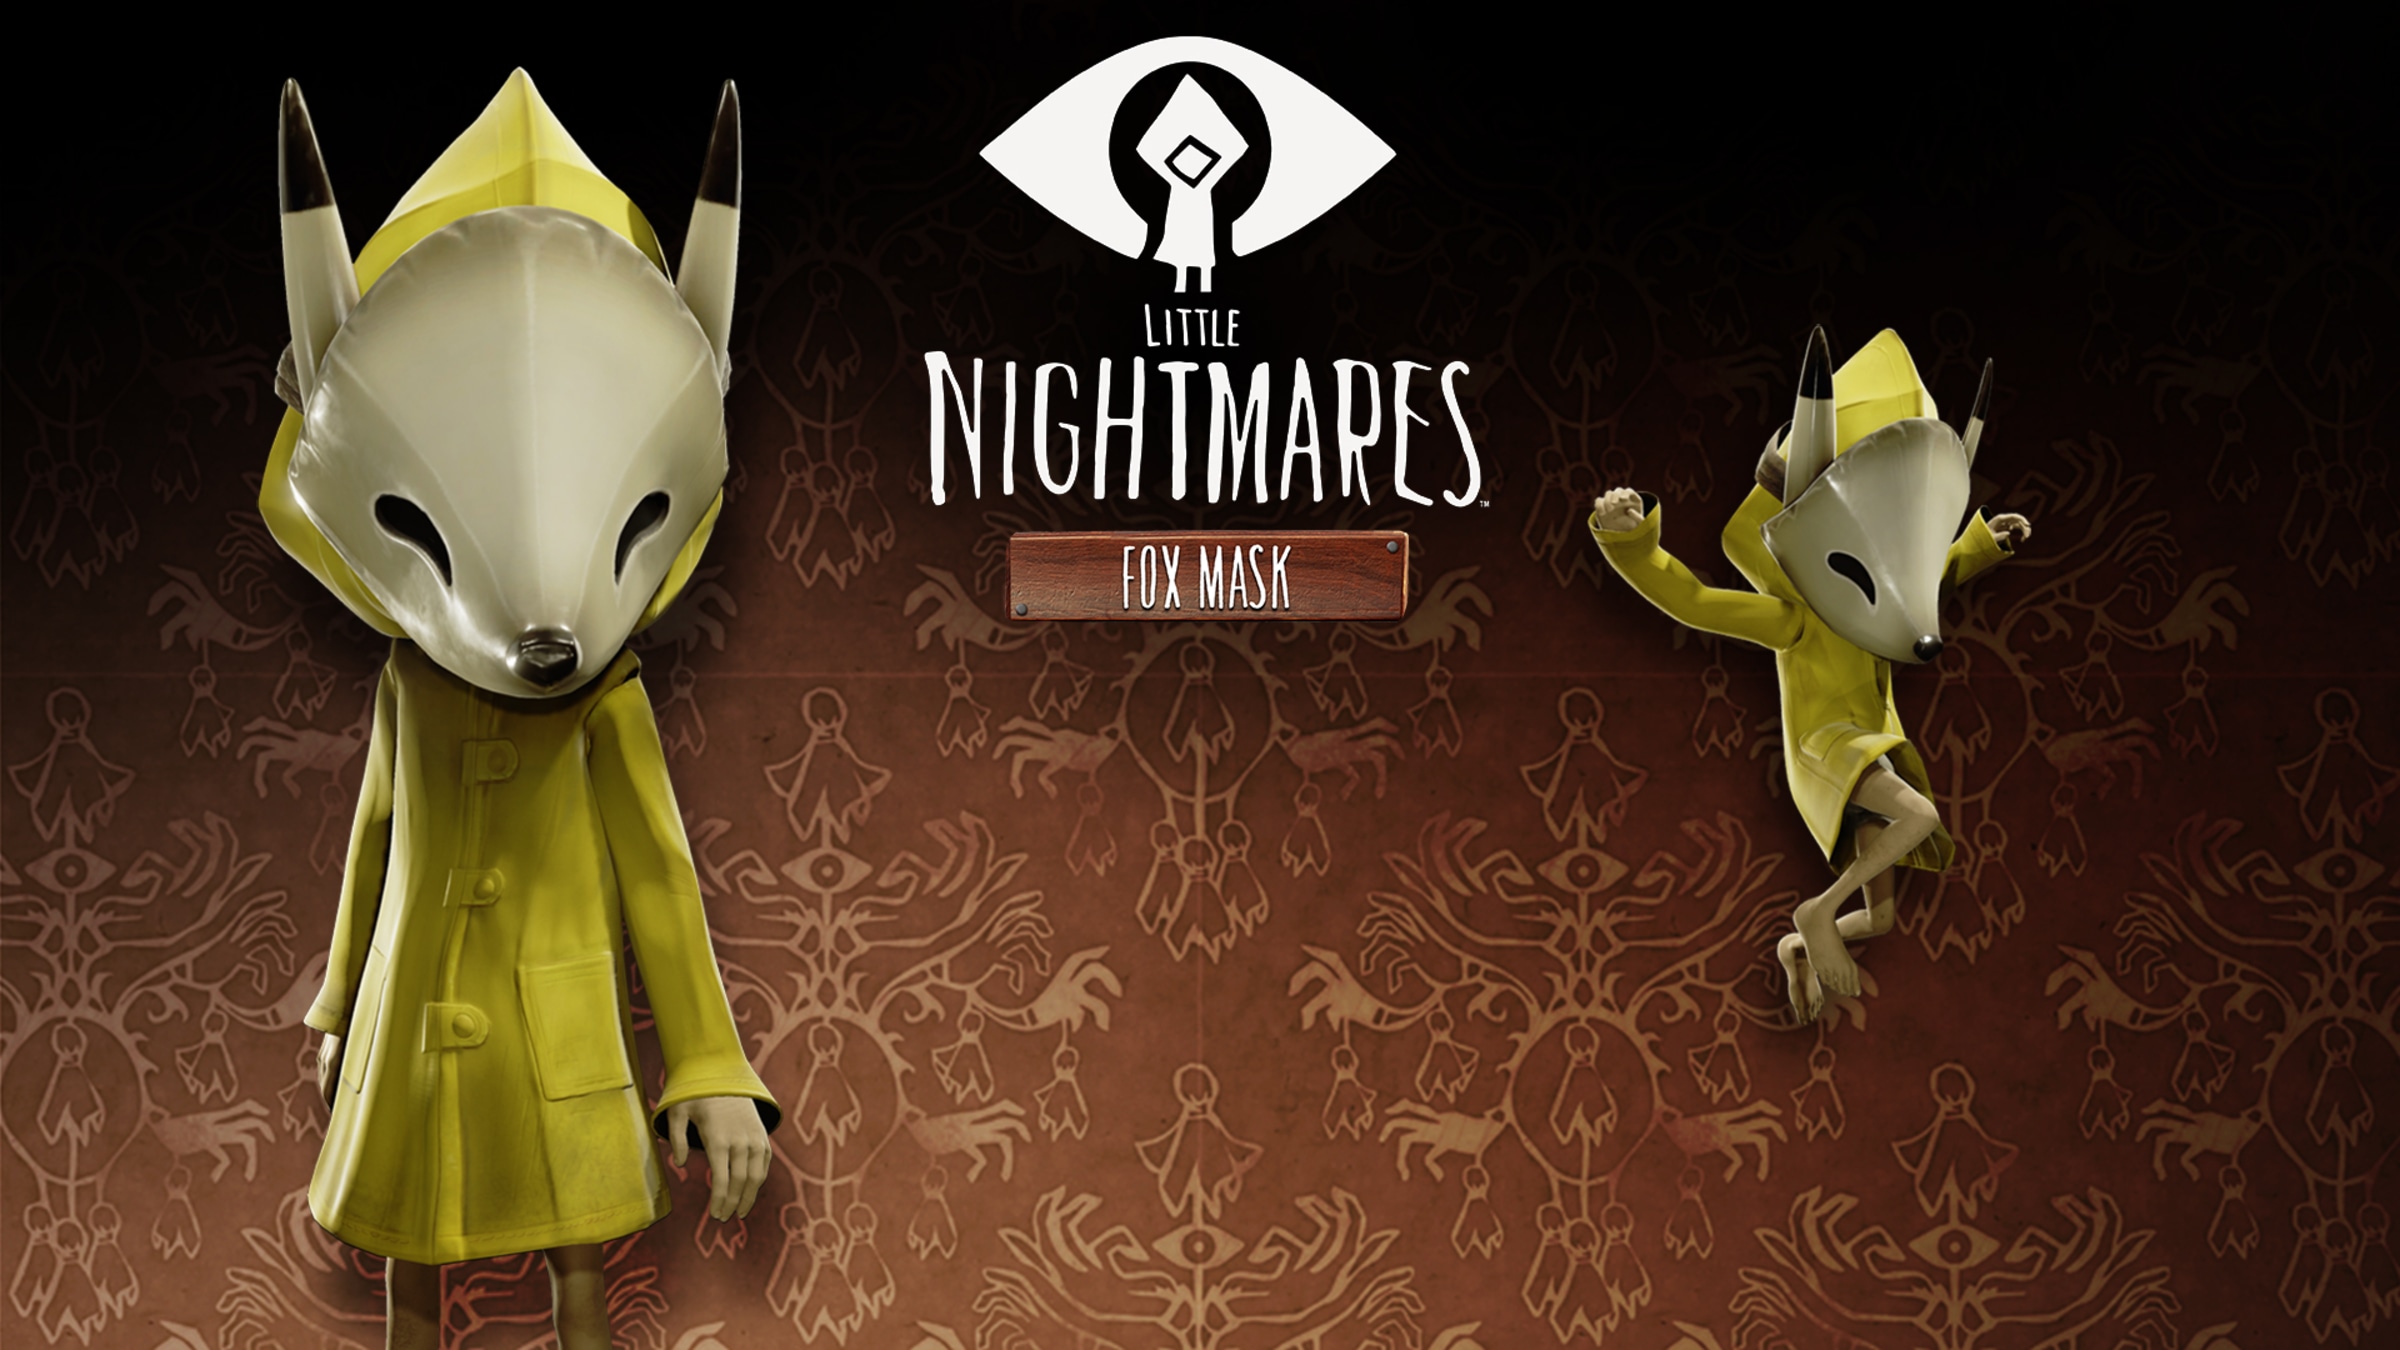 Little Nightmares Fox Mask for Nintendo Switch Nintendo Official Site